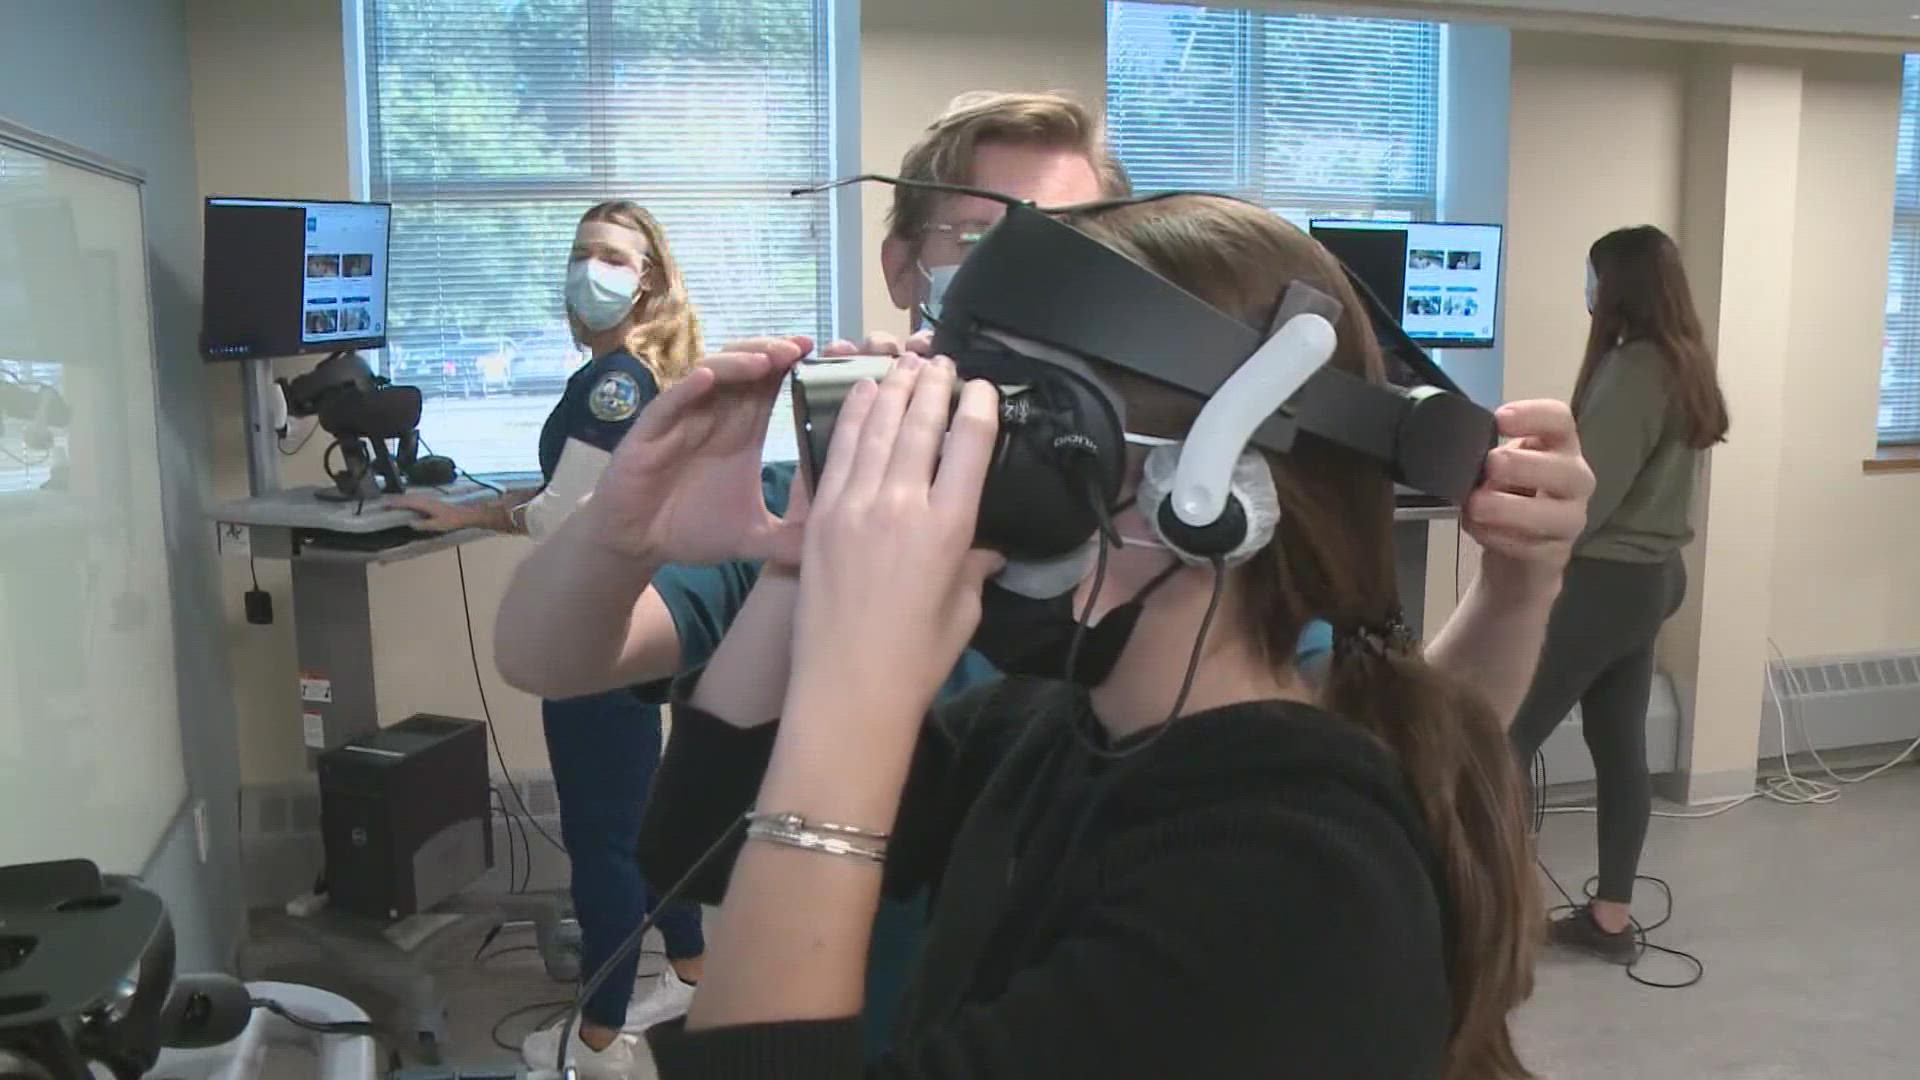 The nursing students are able to learn crucial skills using virtual reality simulations at a time when in-person training in limited.